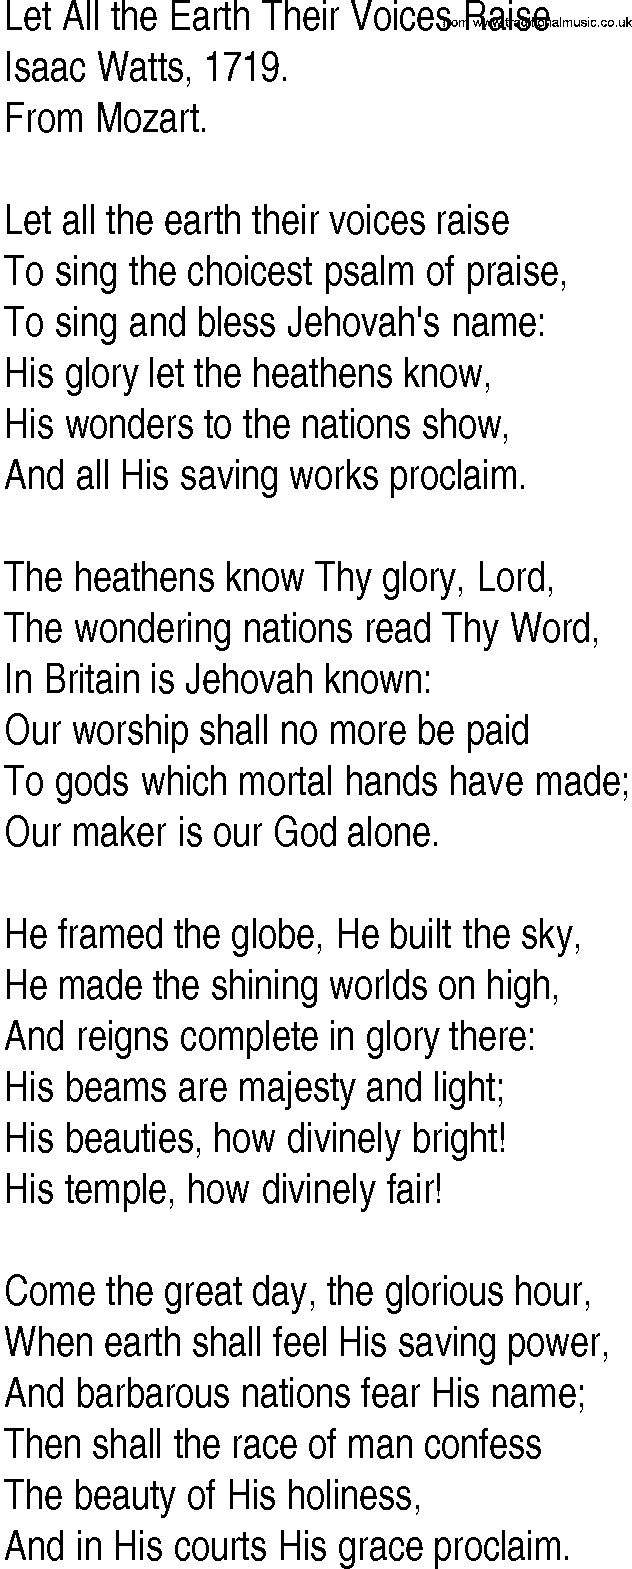 Hymn and Gospel Song: Let All the Earth Their Voices Raise by Isaac Watts lyrics